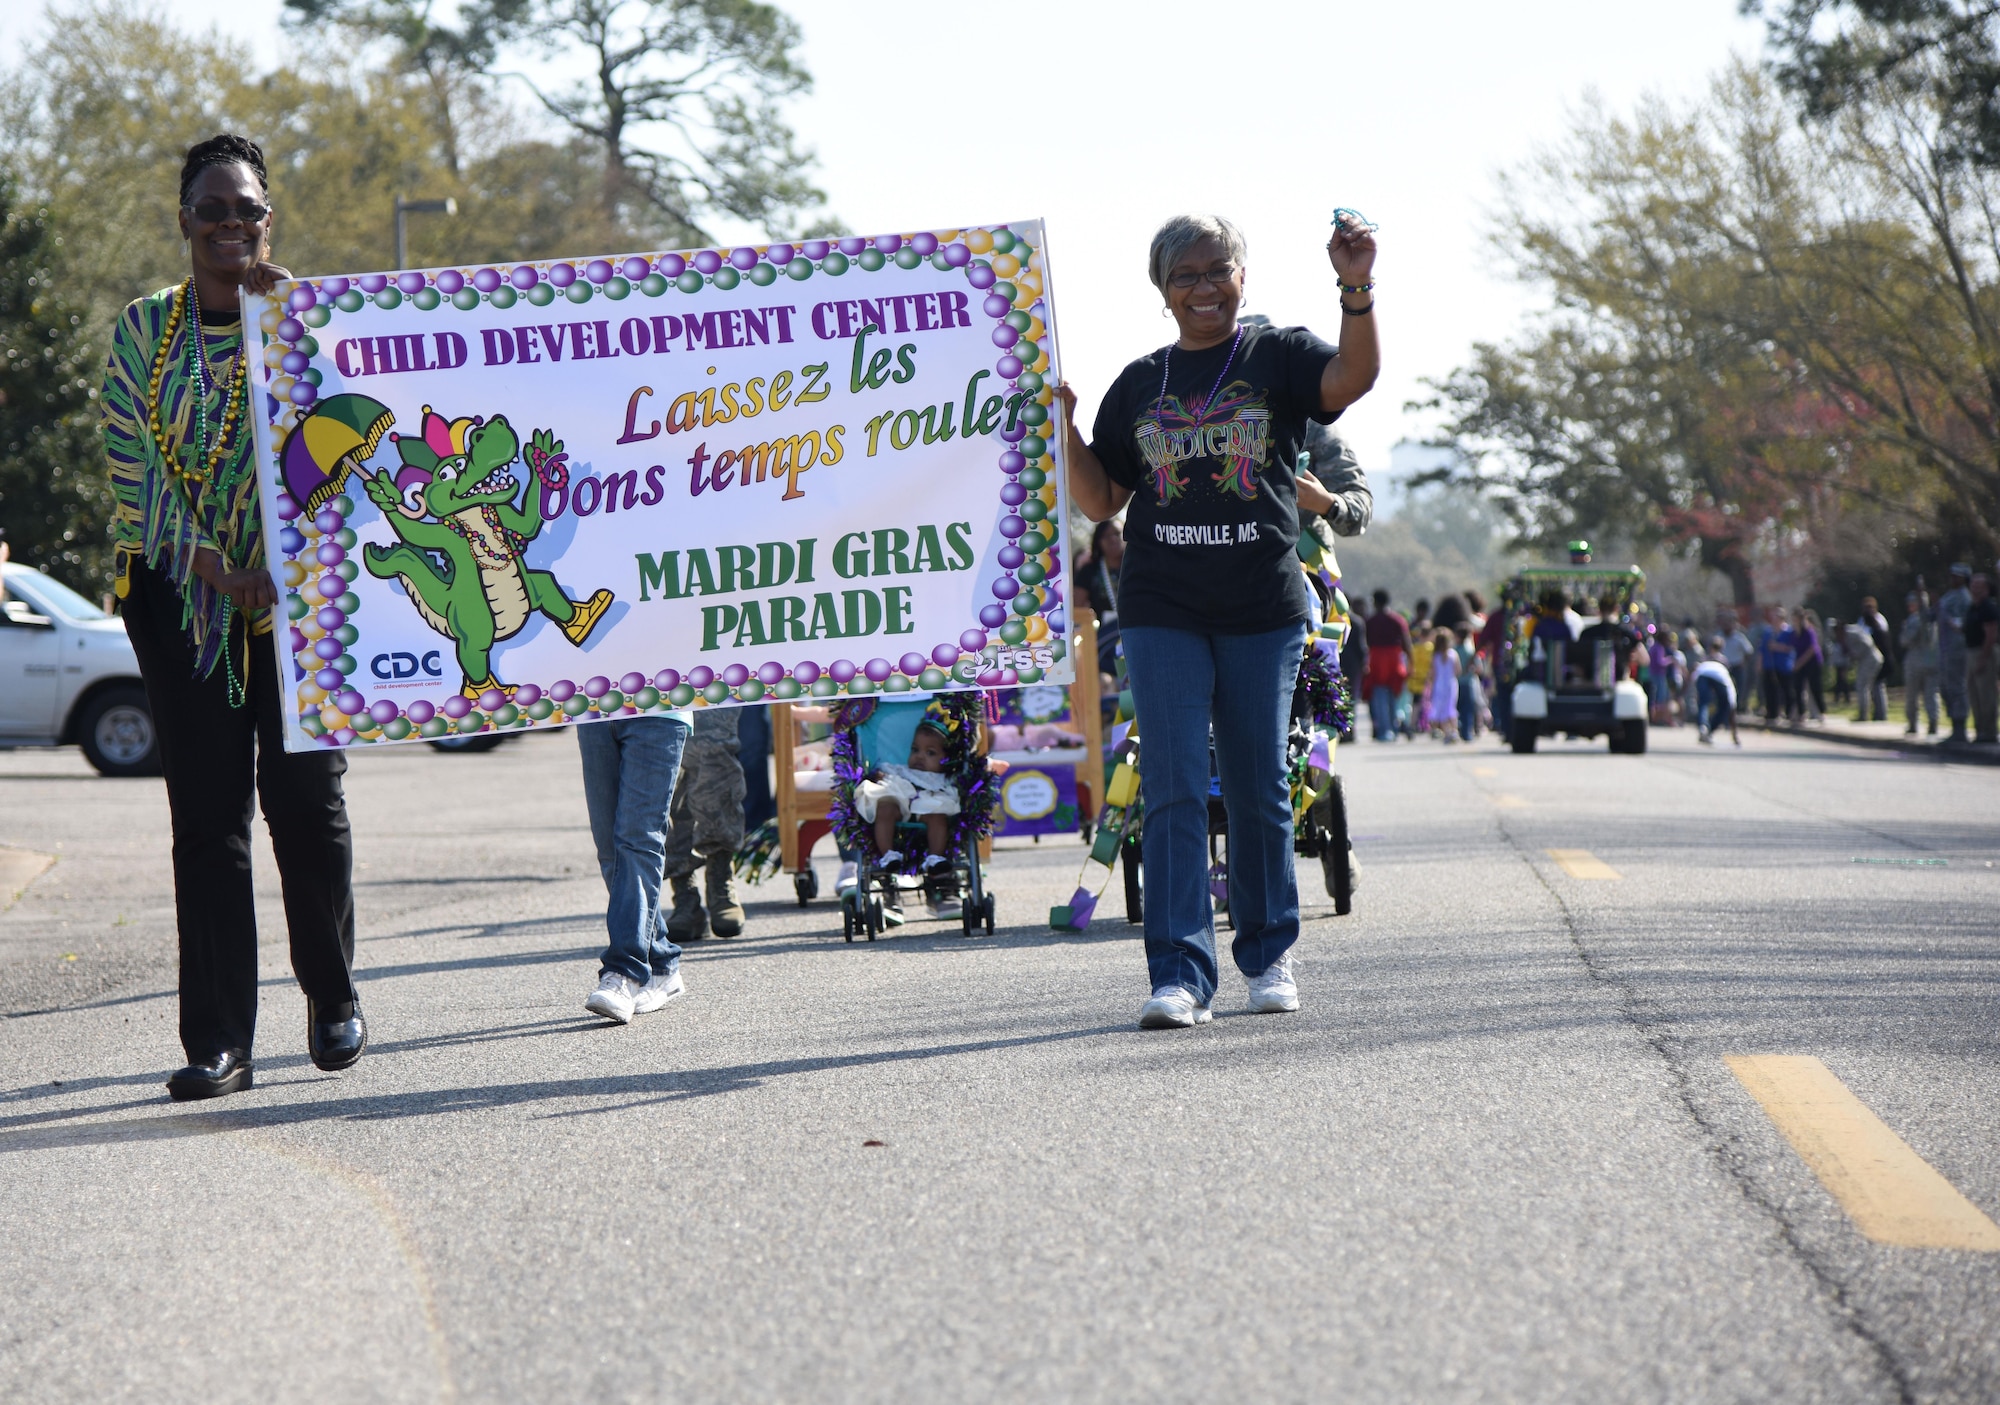 Sadaki Lewis, 81st Force Support Squadron child development center program supervisor, and Juanita Harper, CDC assistant director, hold a banner during the center’s Mardi Gras parade Feb. 28, 2017, on Keesler Air Force Base, Miss. More than 300 children participated in the event, which started in 2009. (U.S. Air Force photo by Kemberly Groue)